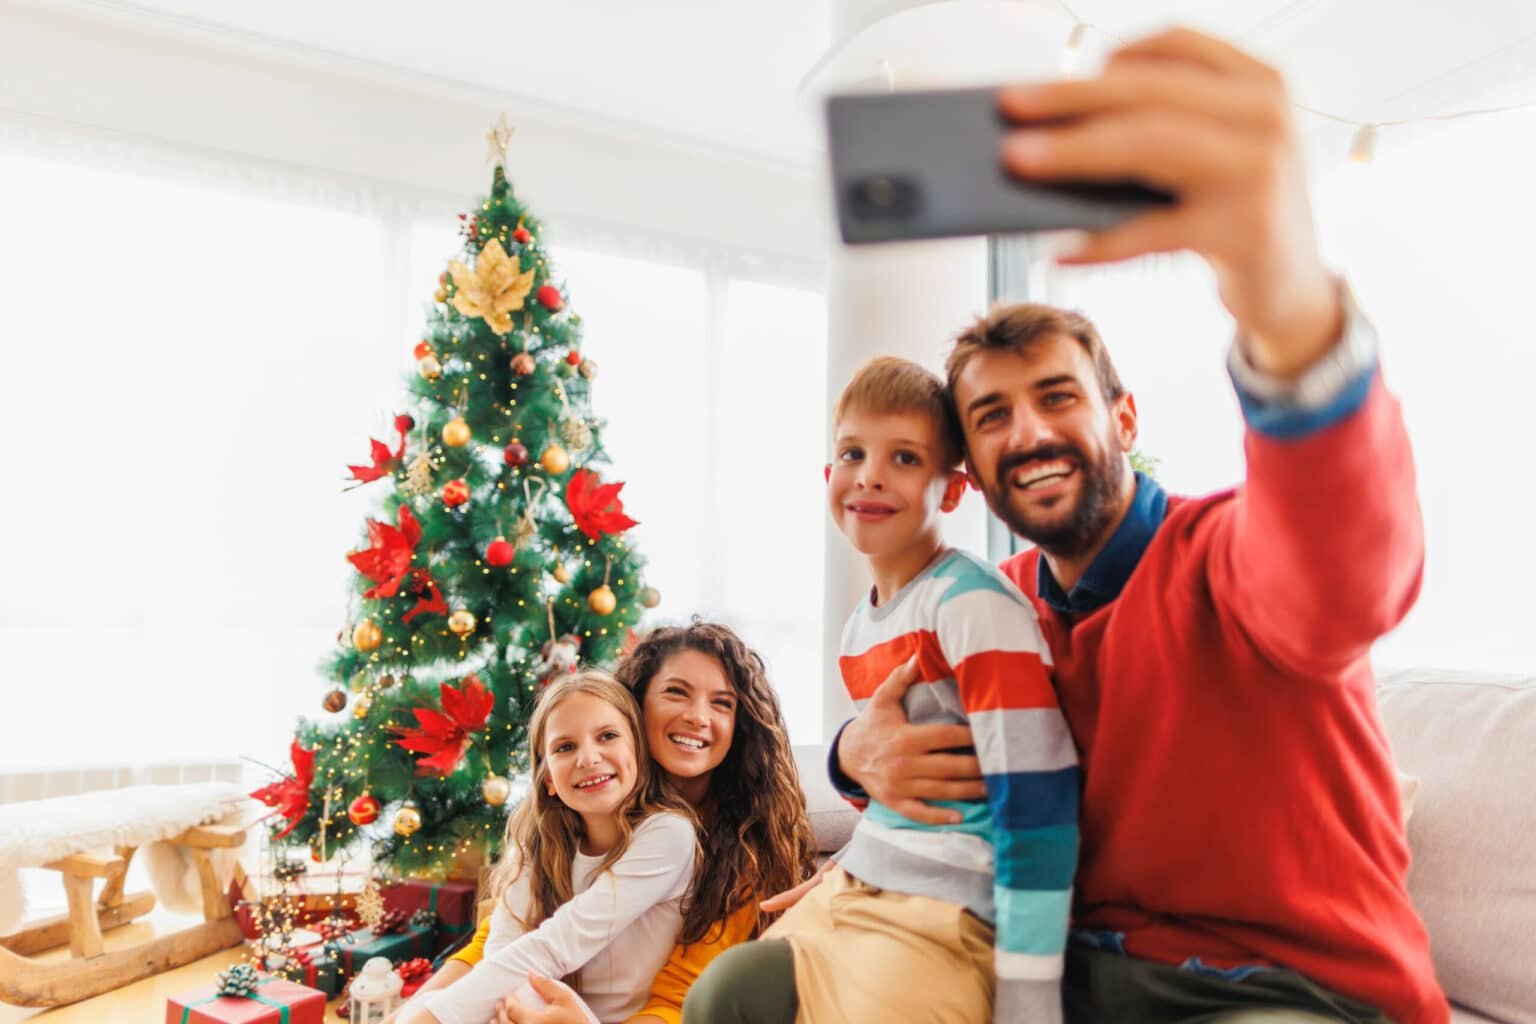 Supporting Children's Mental Health During the Holidays